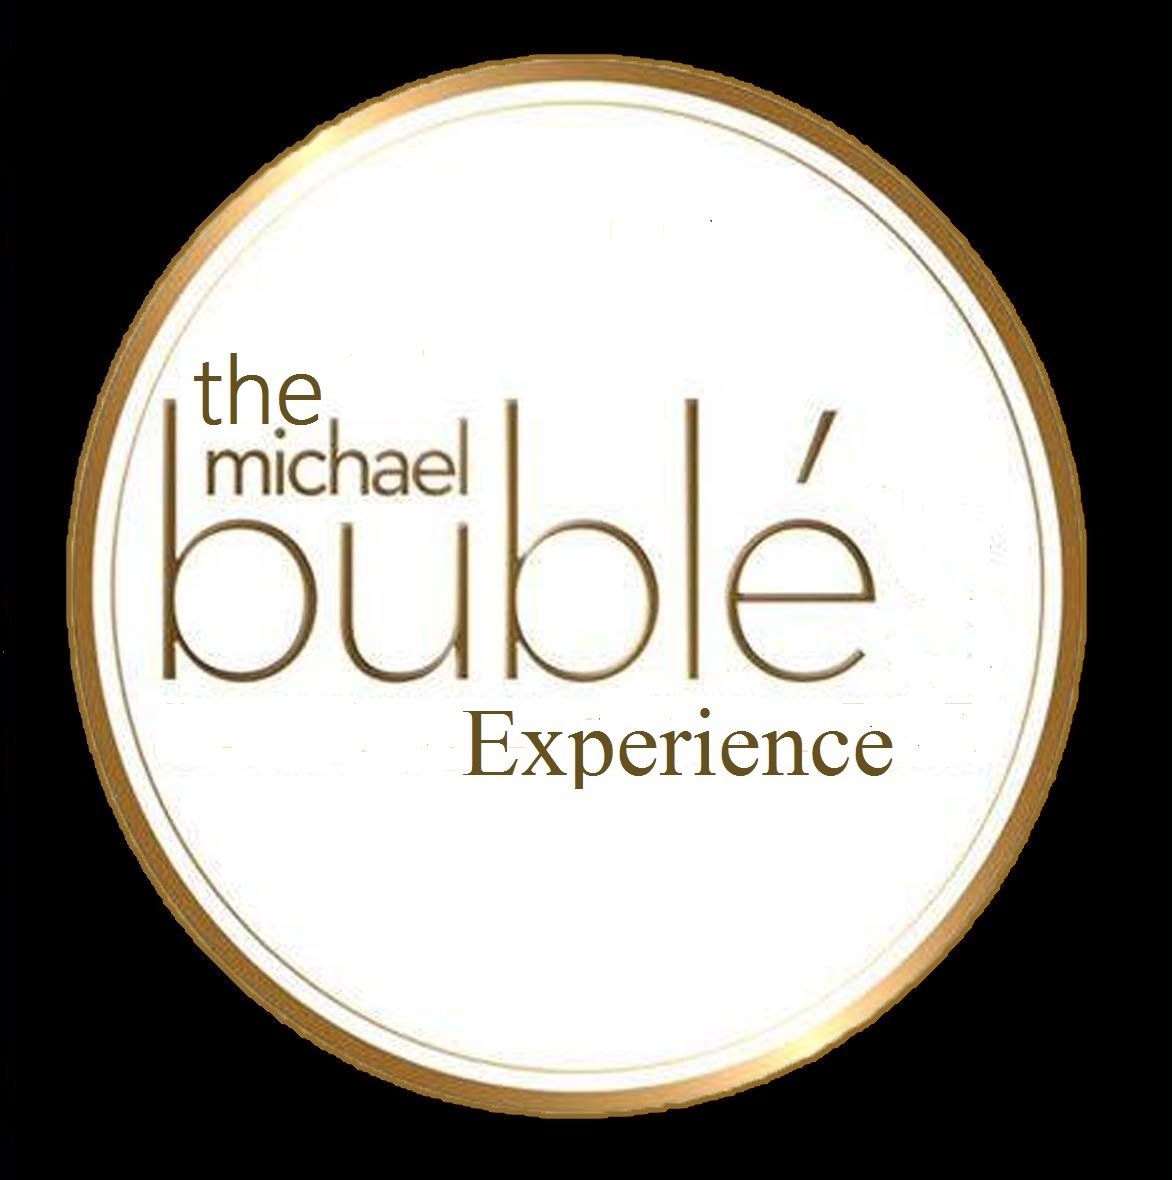 Ticket for 'The Michael Bublé Experience' at Concorde Club, Eastleigh, on Thursday 23rd May 2019 (Doors open at 7pm)